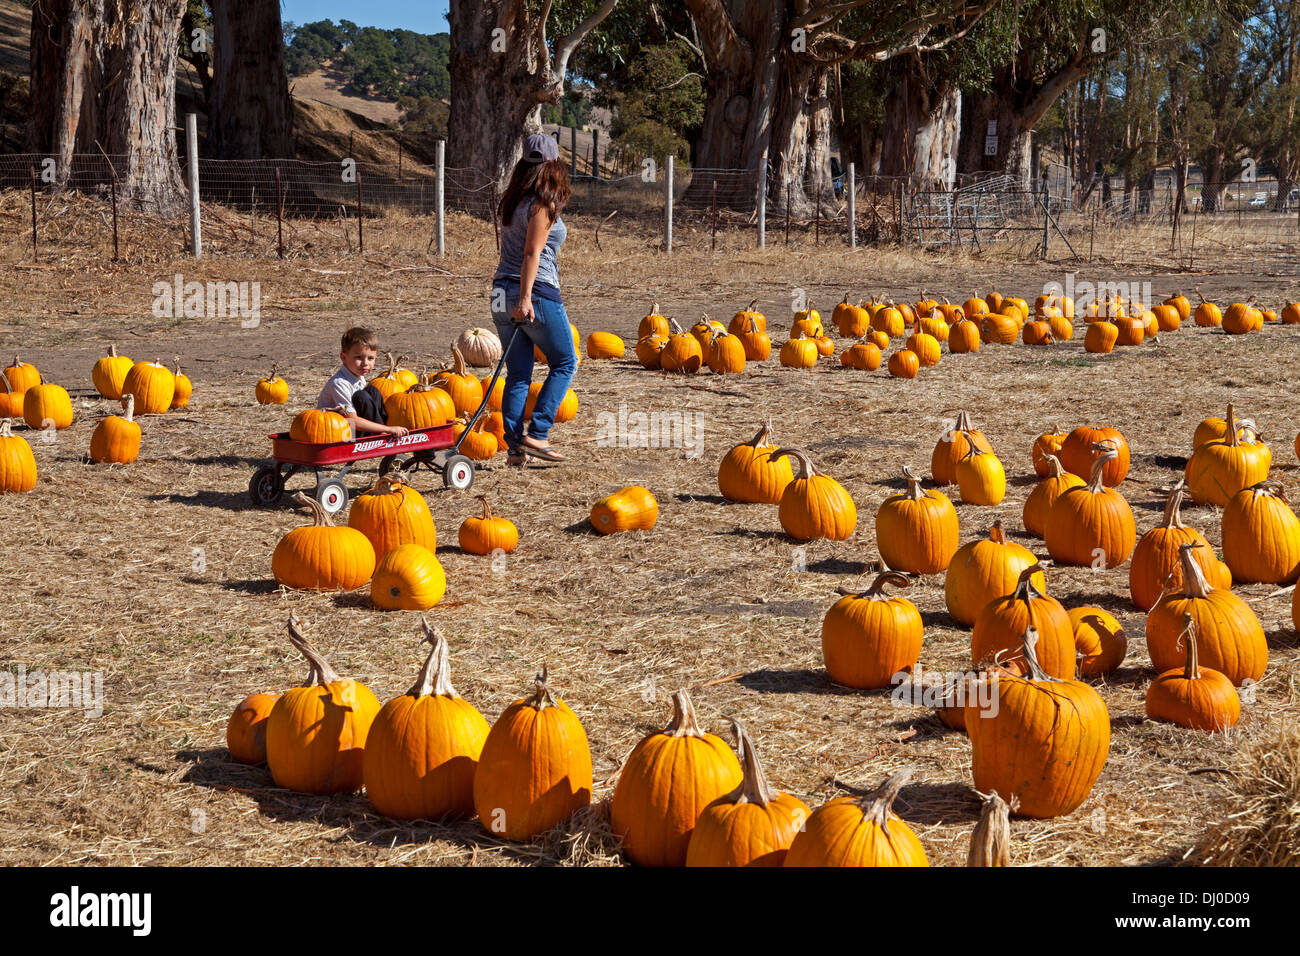 Woman hauling pumpkins with her boy in a little red wagon at the St. Vincent’s Field pumpkin patch, San Rafael, California, USA. Stock Photo